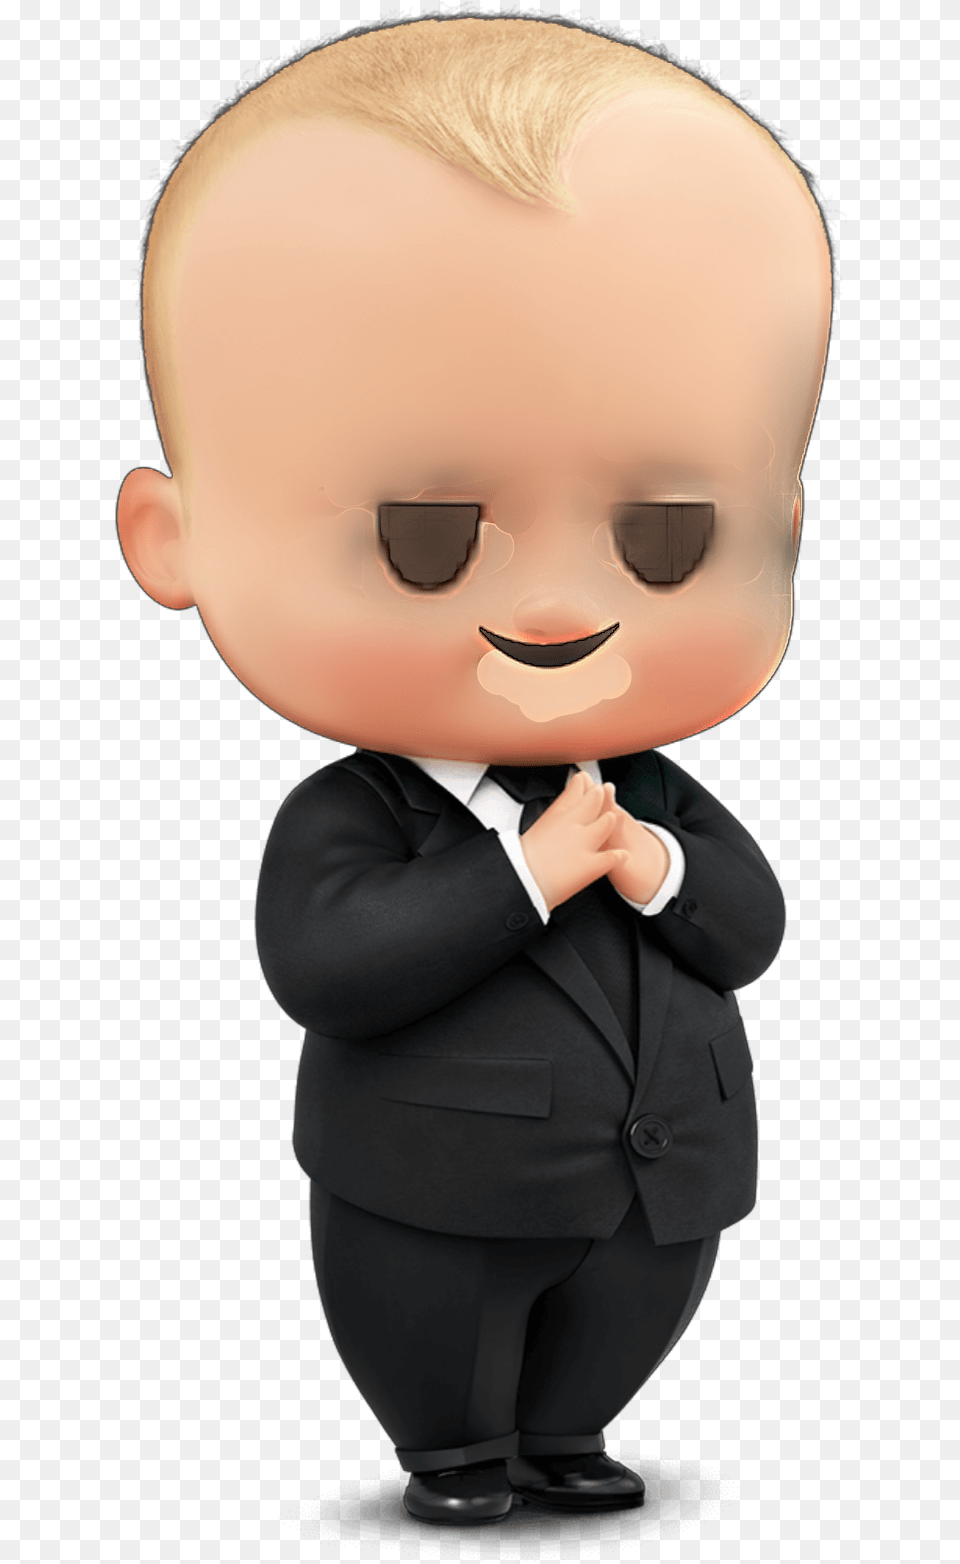 Bossbaby Chillface Chill Boss Baby, Formal Wear, Clothing, Suit, Person Png Image